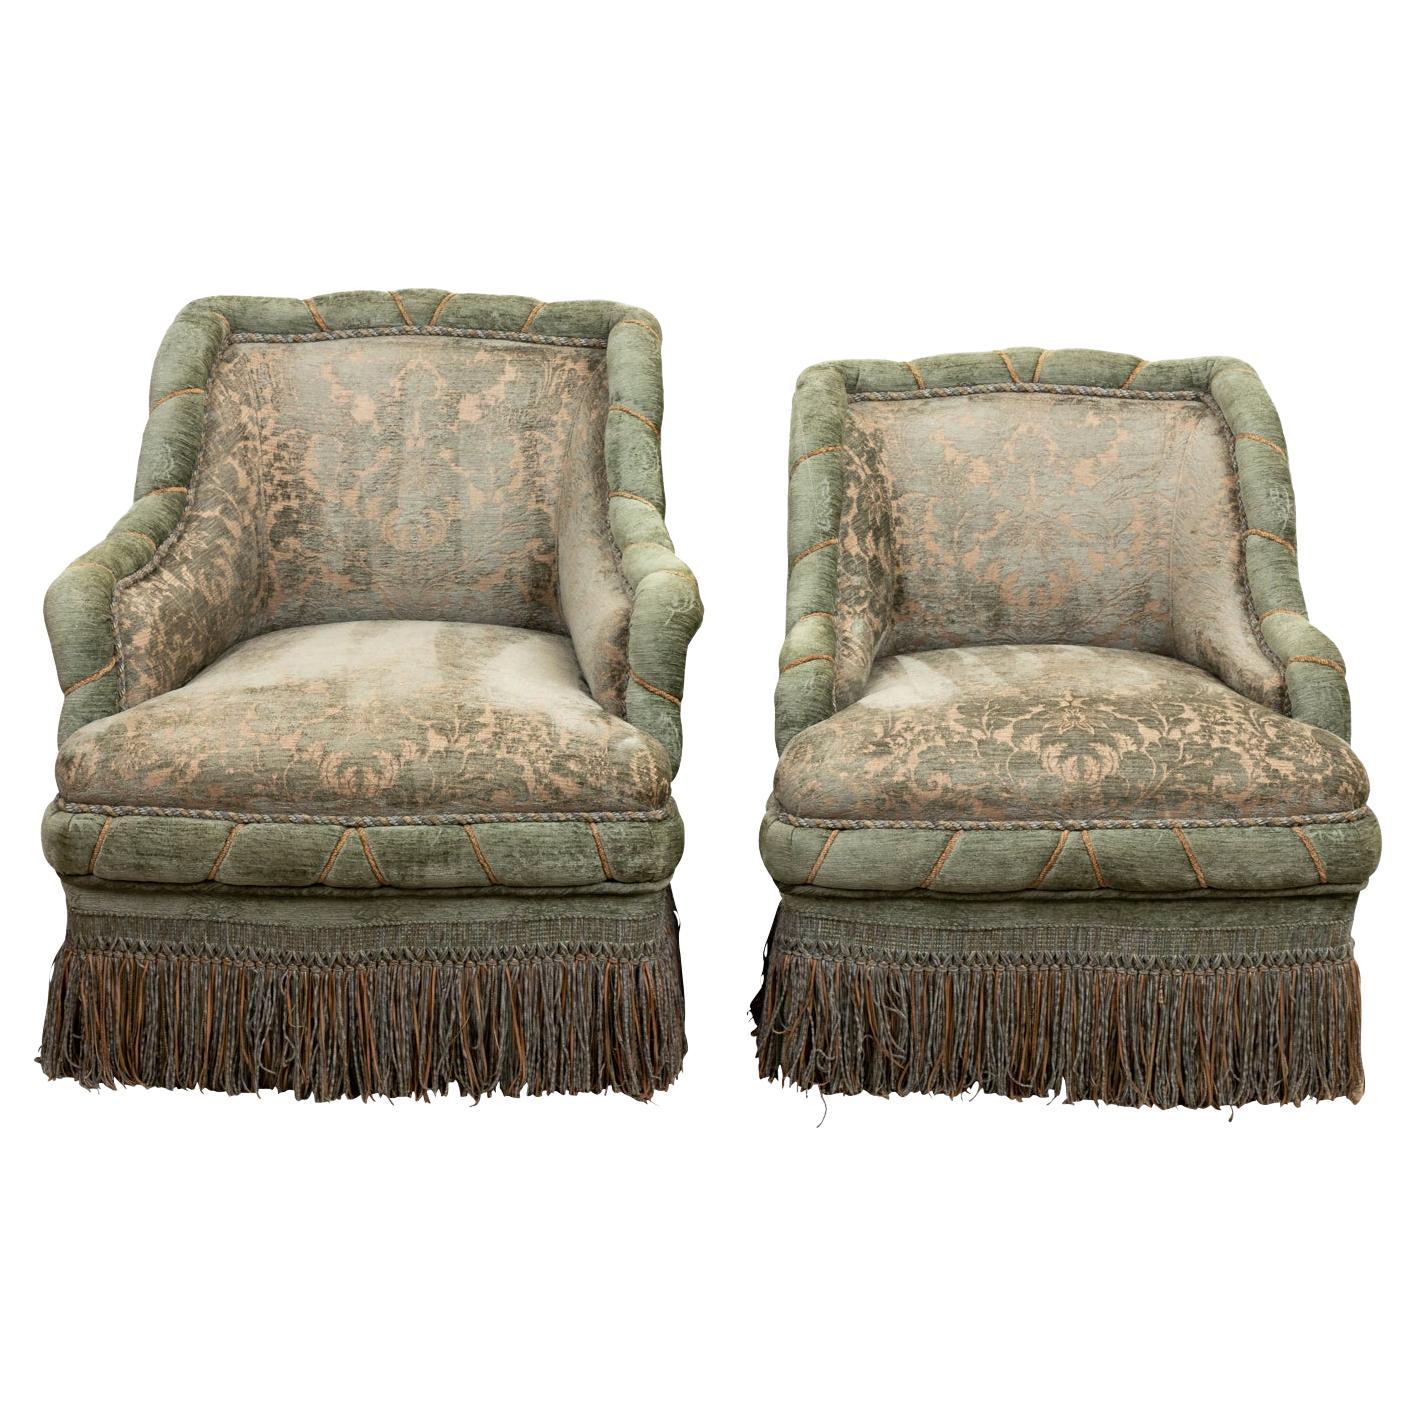 Pair Edwardian Style Upholstered Slipper Chairs For Sale